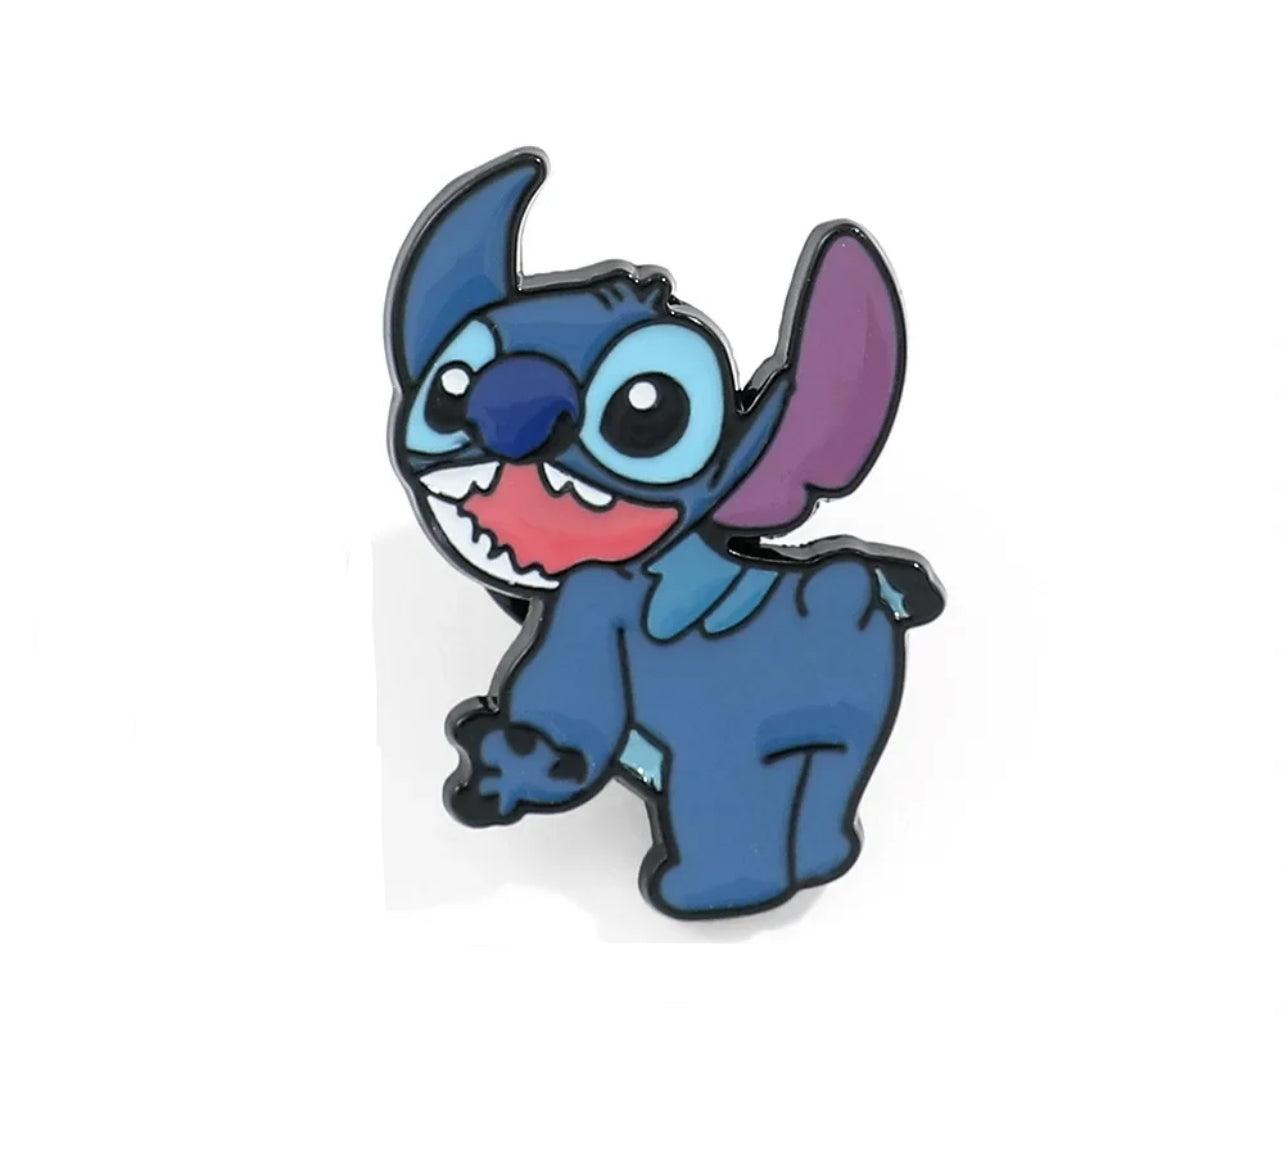 Stitch- what do you want?